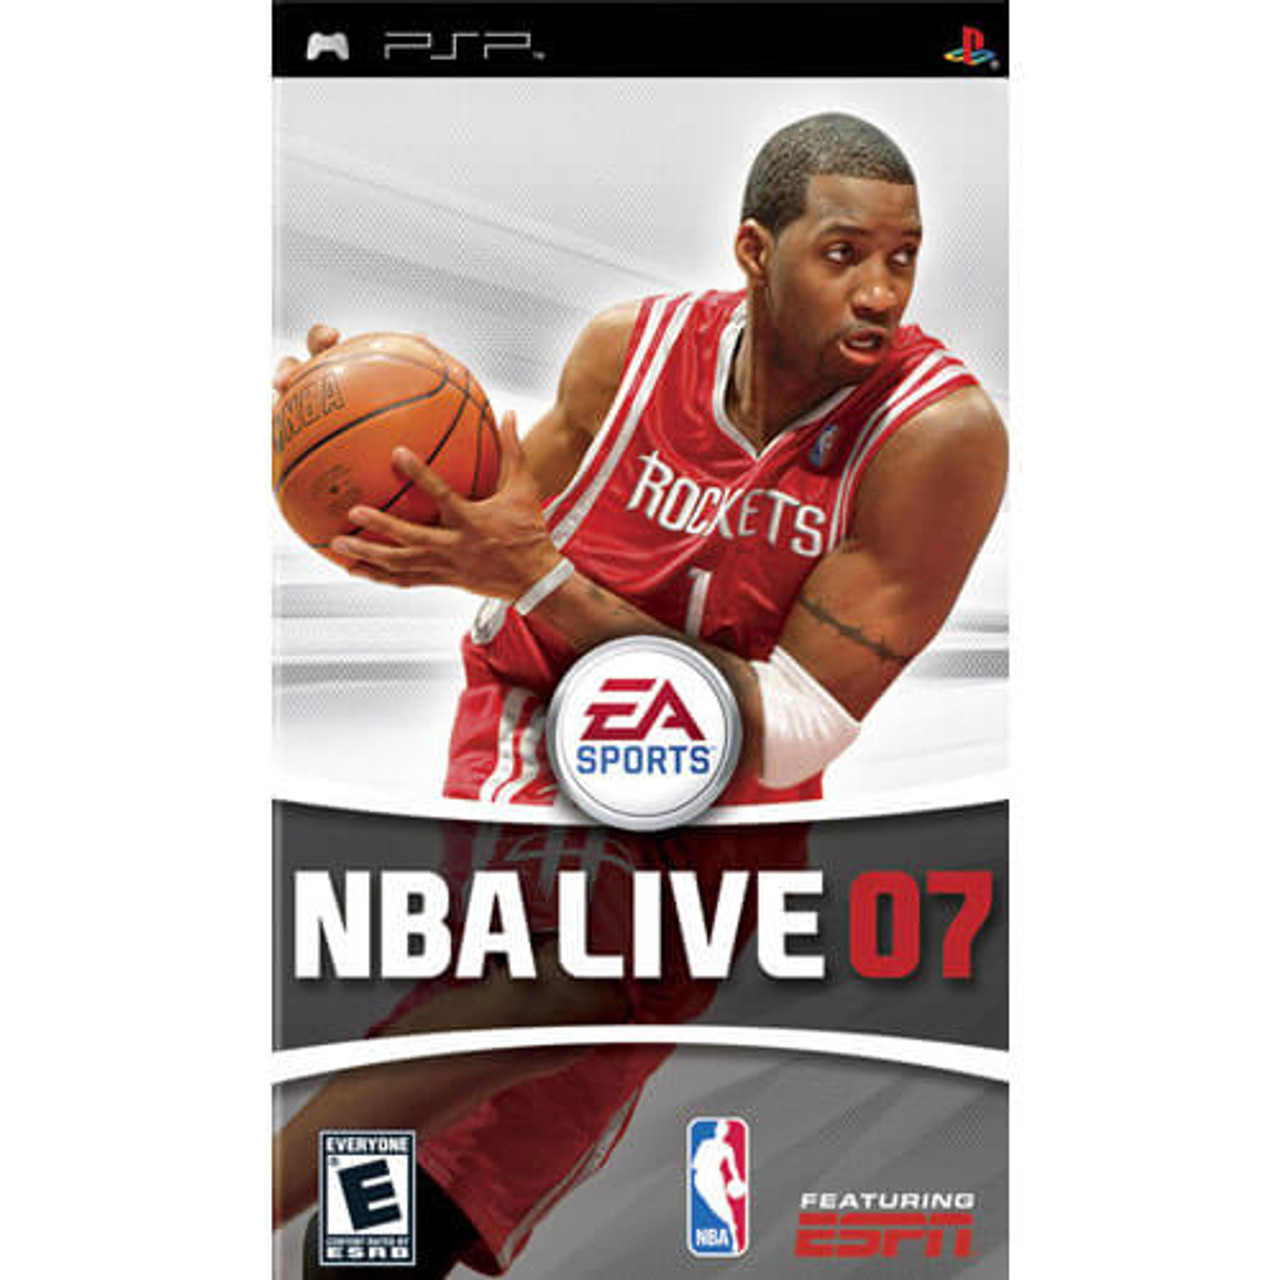 NBA Live 07 PSP Game For Sale DKOldies